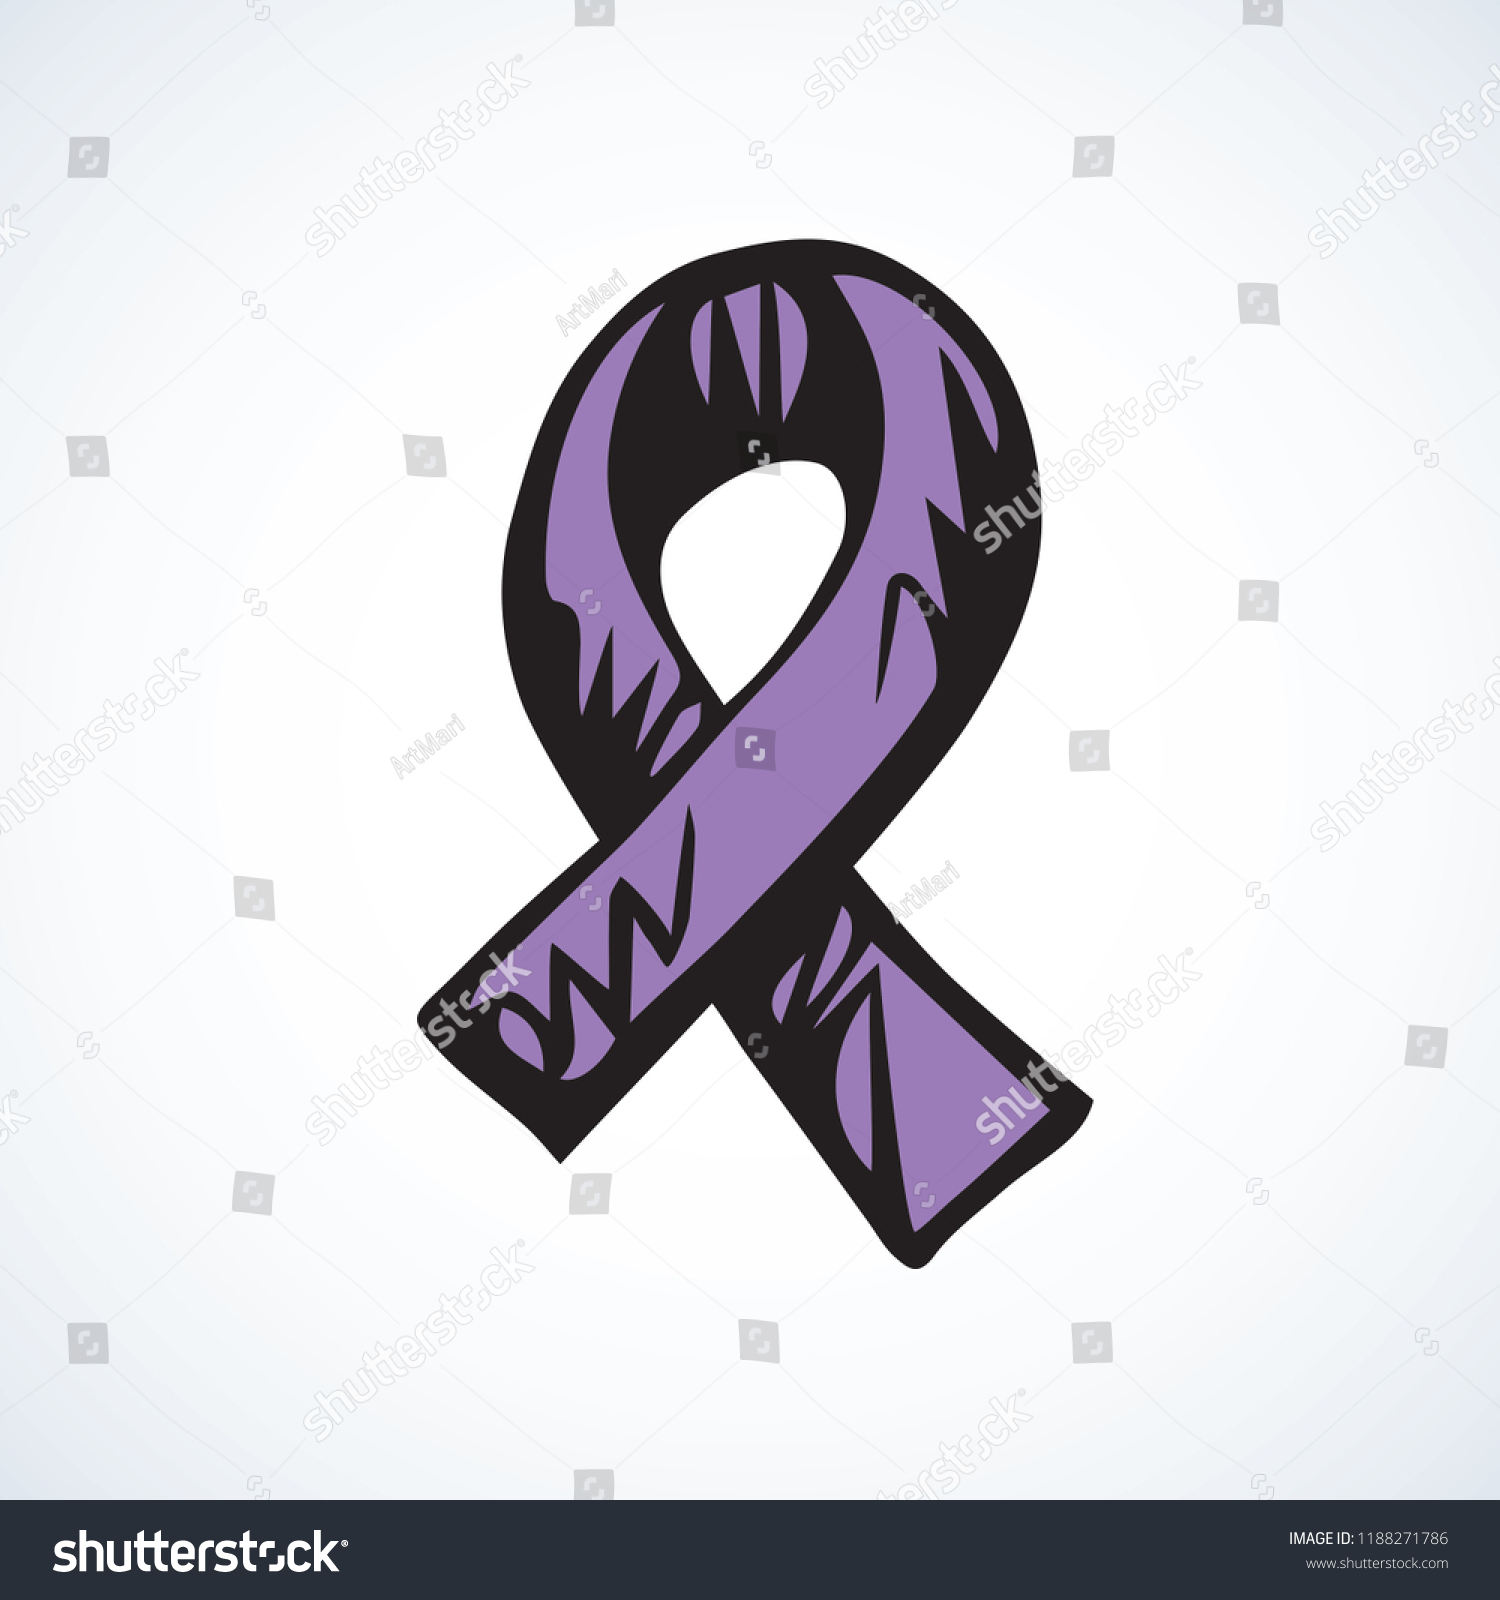 SVG of Logo of problem of epilepsy, eating concern, craniosynostosis, esophageal, pulmonary hypertension, kinds of tumors. Abstract line issue hope concept. Hand drawn doodle healthcare emblem lilac color svg